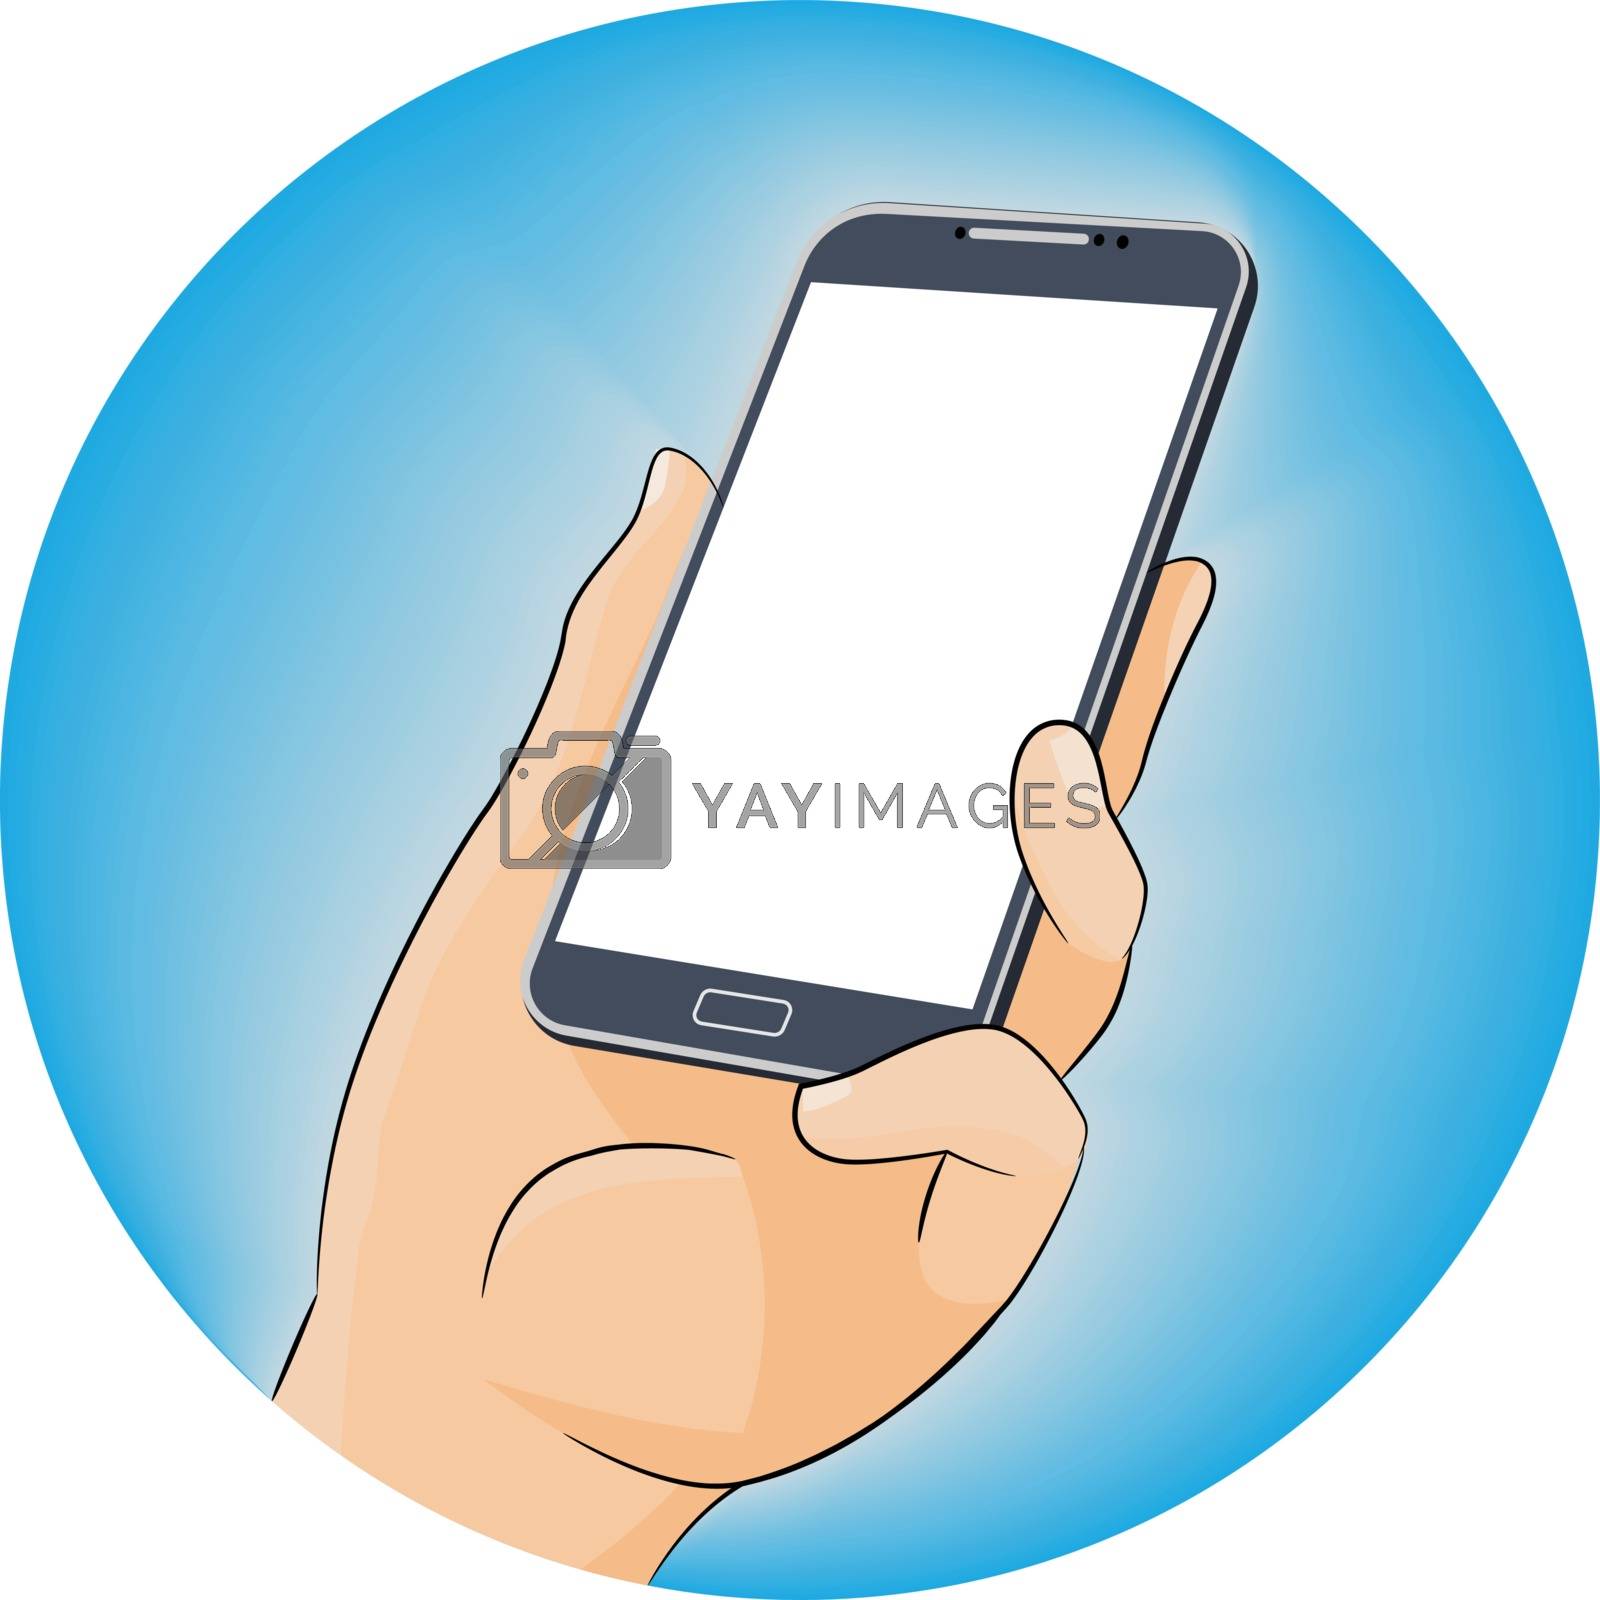 Royalty free image of Hand holding mobile phone in flat design style with blank screen by solargaria